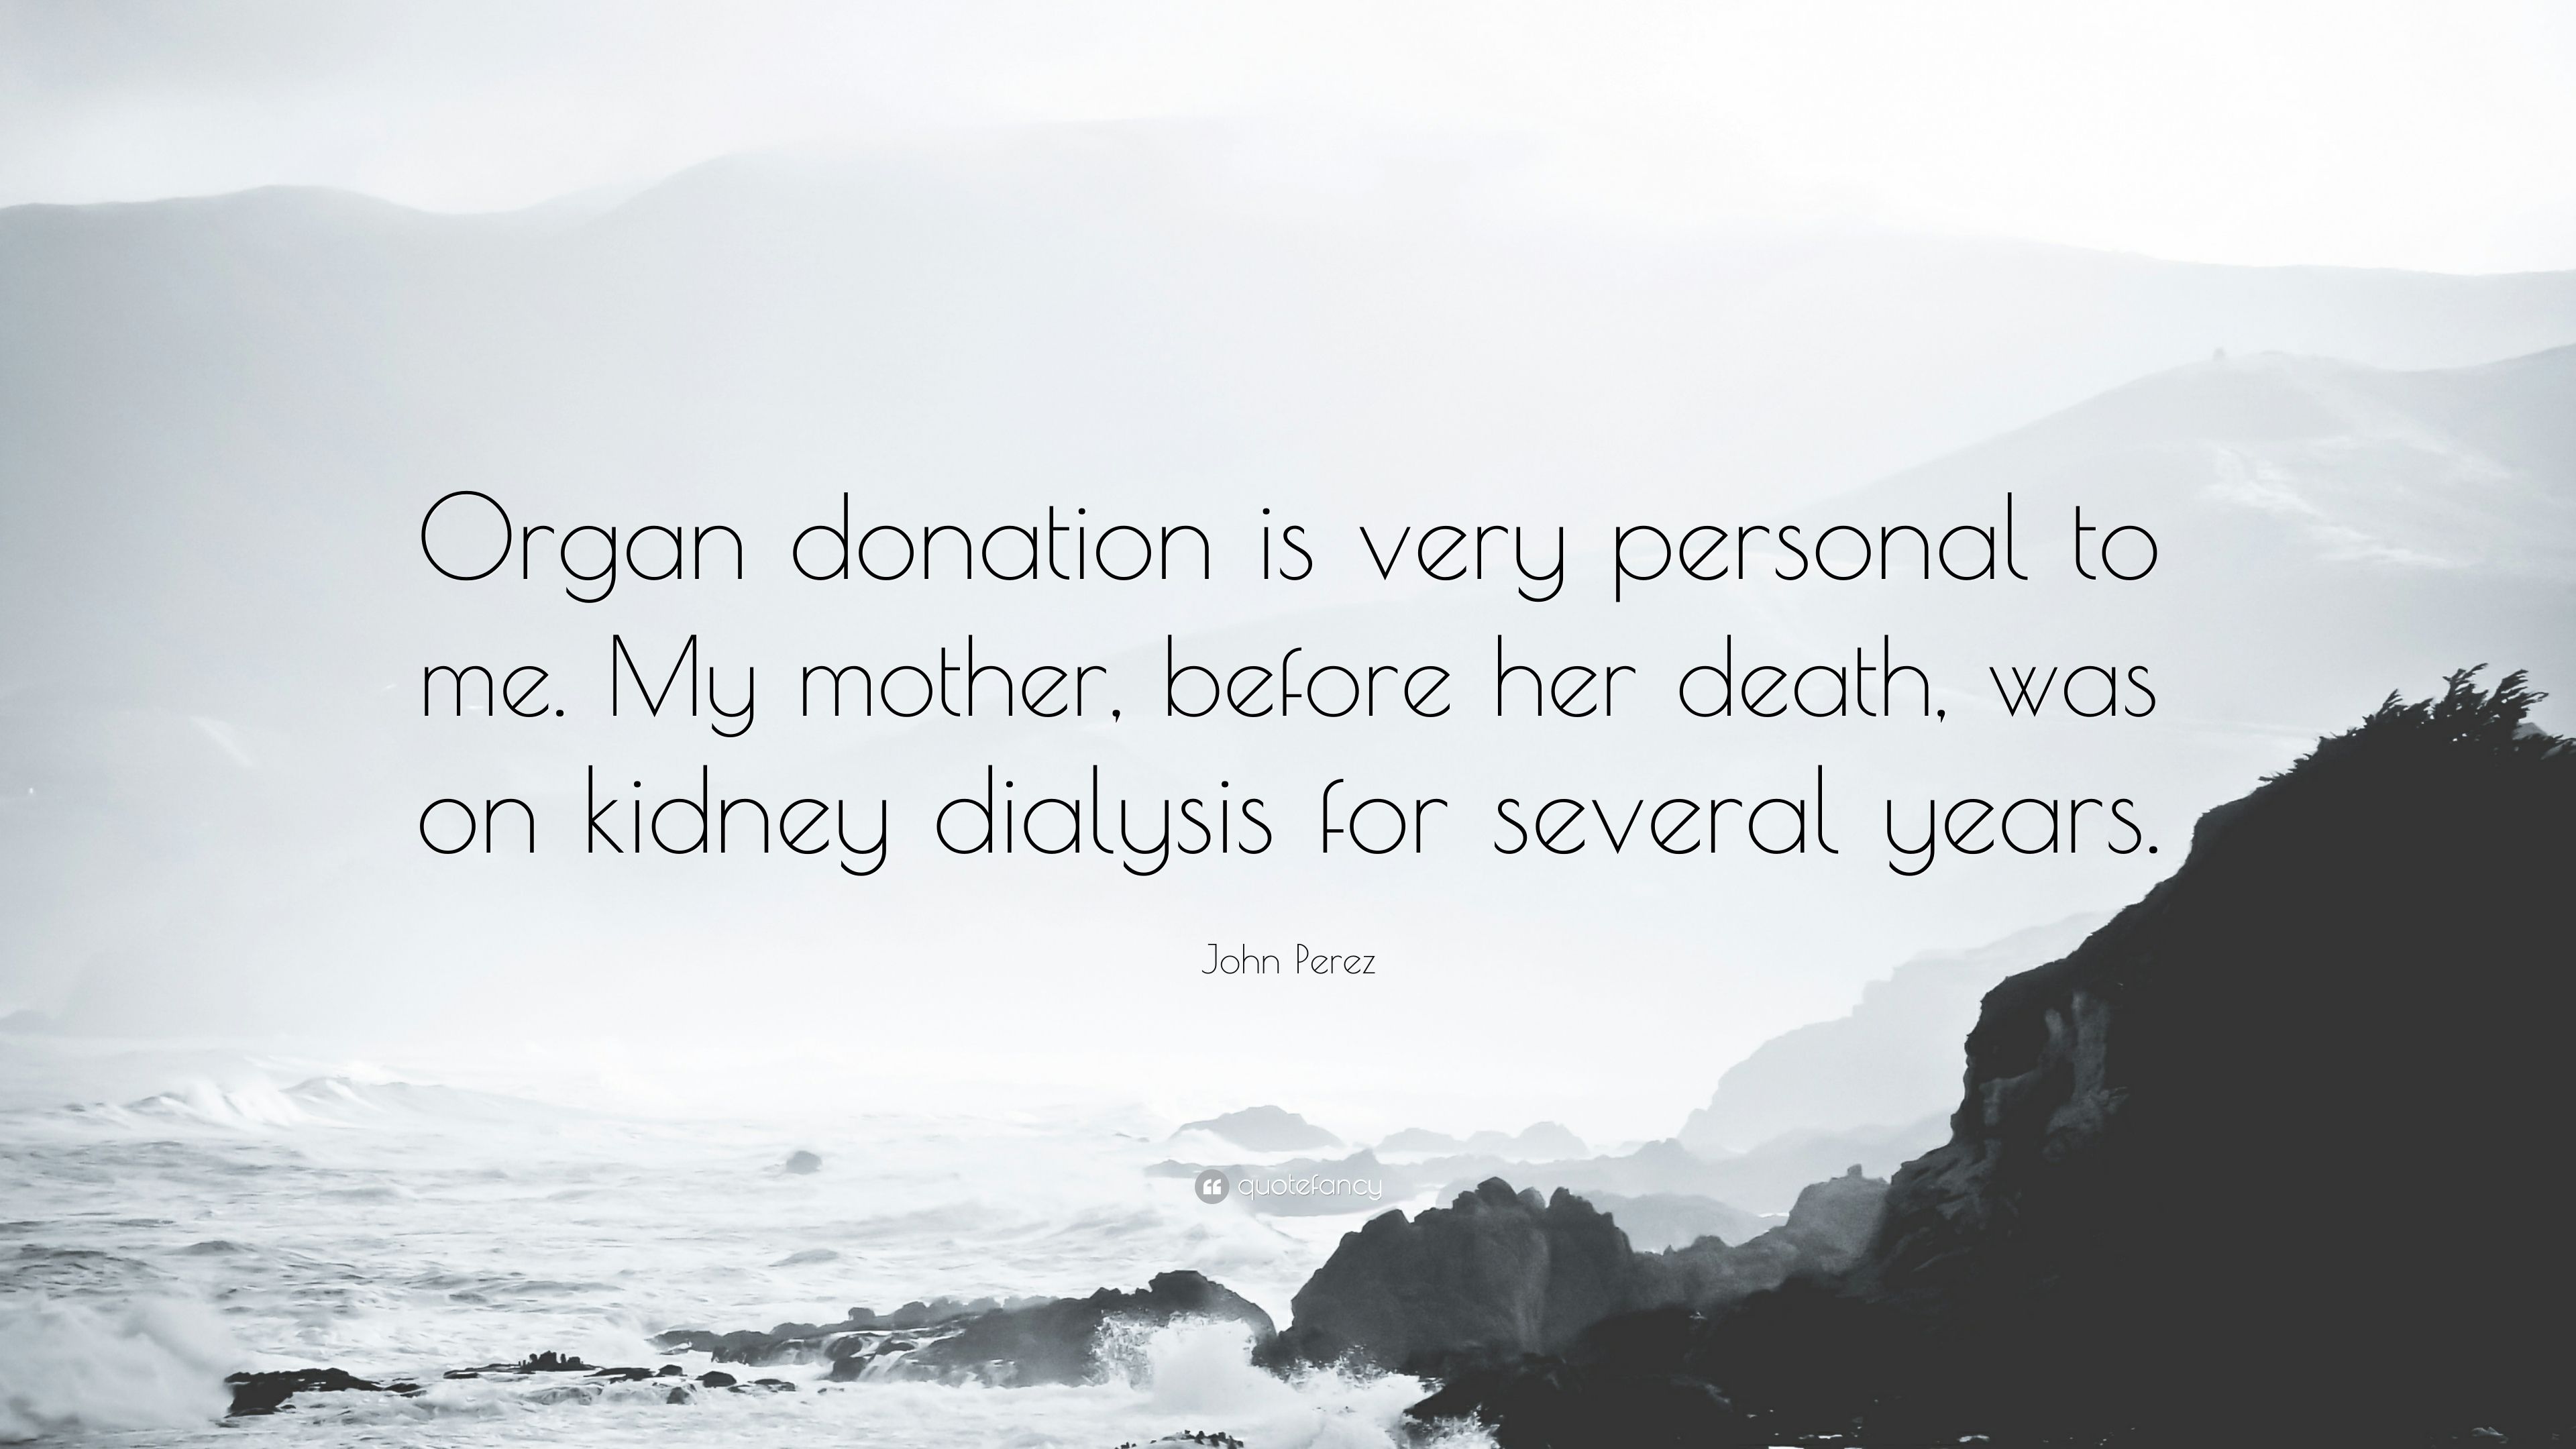 John Perez Quote: “Organ donation is very personal to me. My